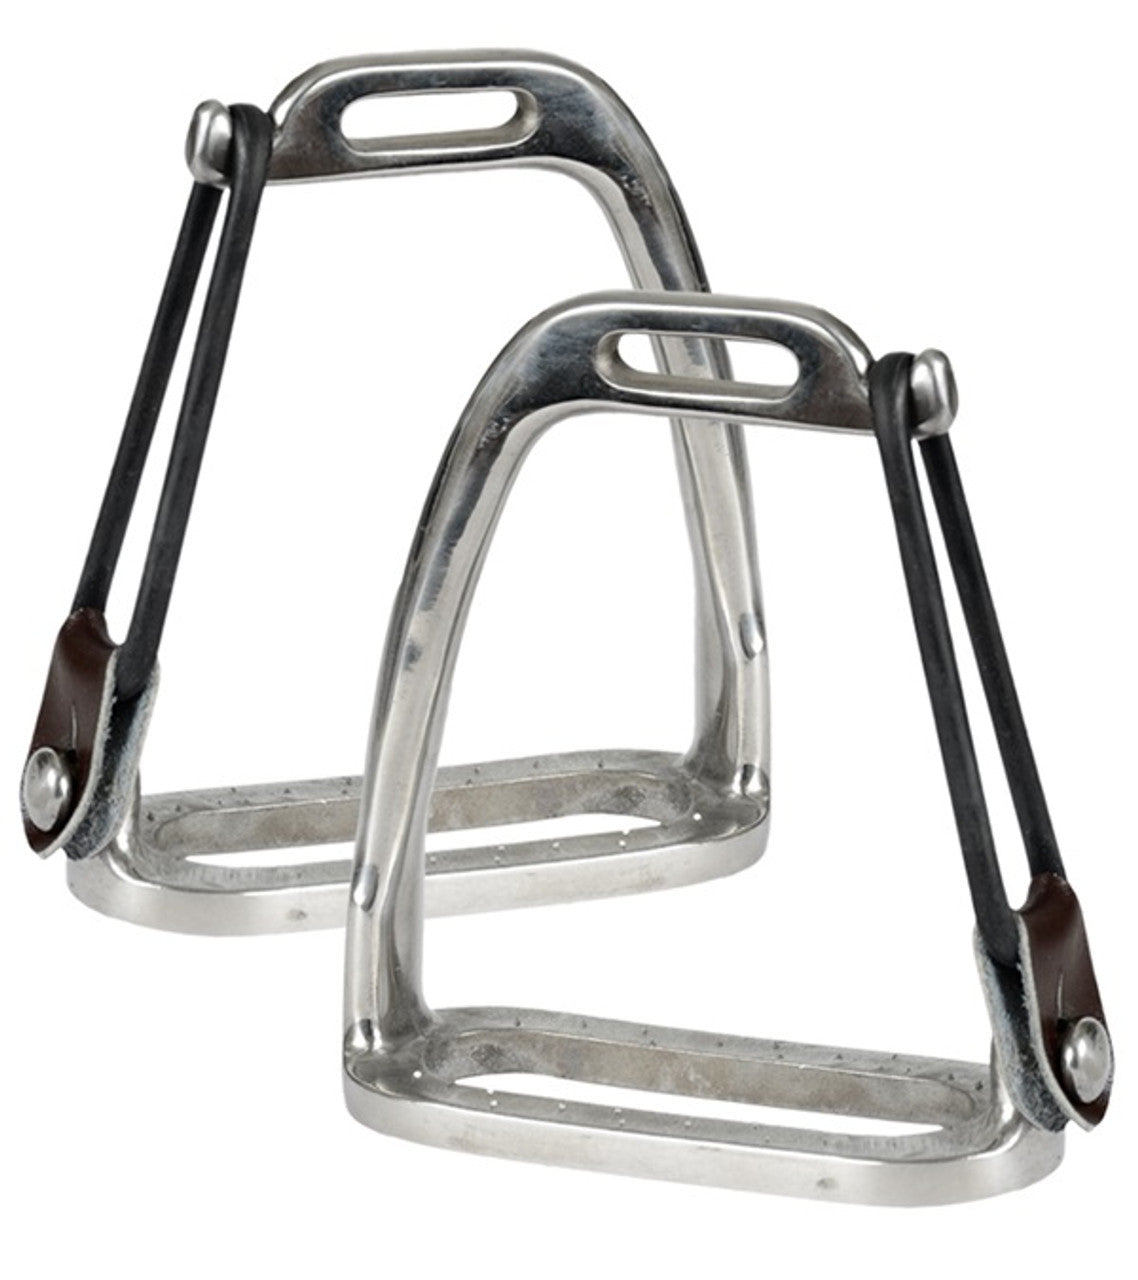 Stainless Steel Peacock Safety Stirrups-TexanSaddles.com